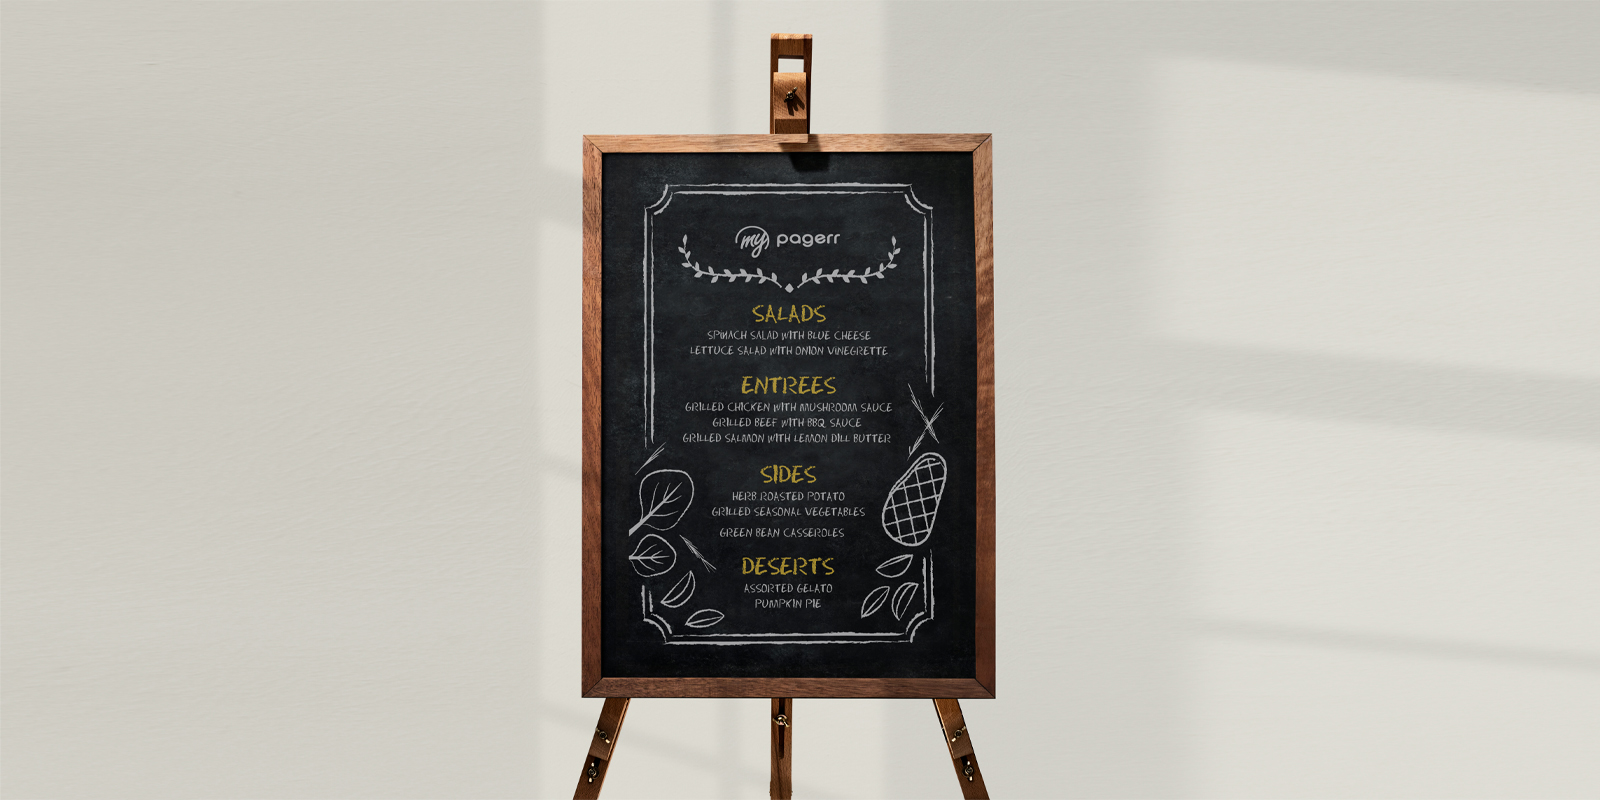 Chalkboard signs in Paris - Print with Pagerr